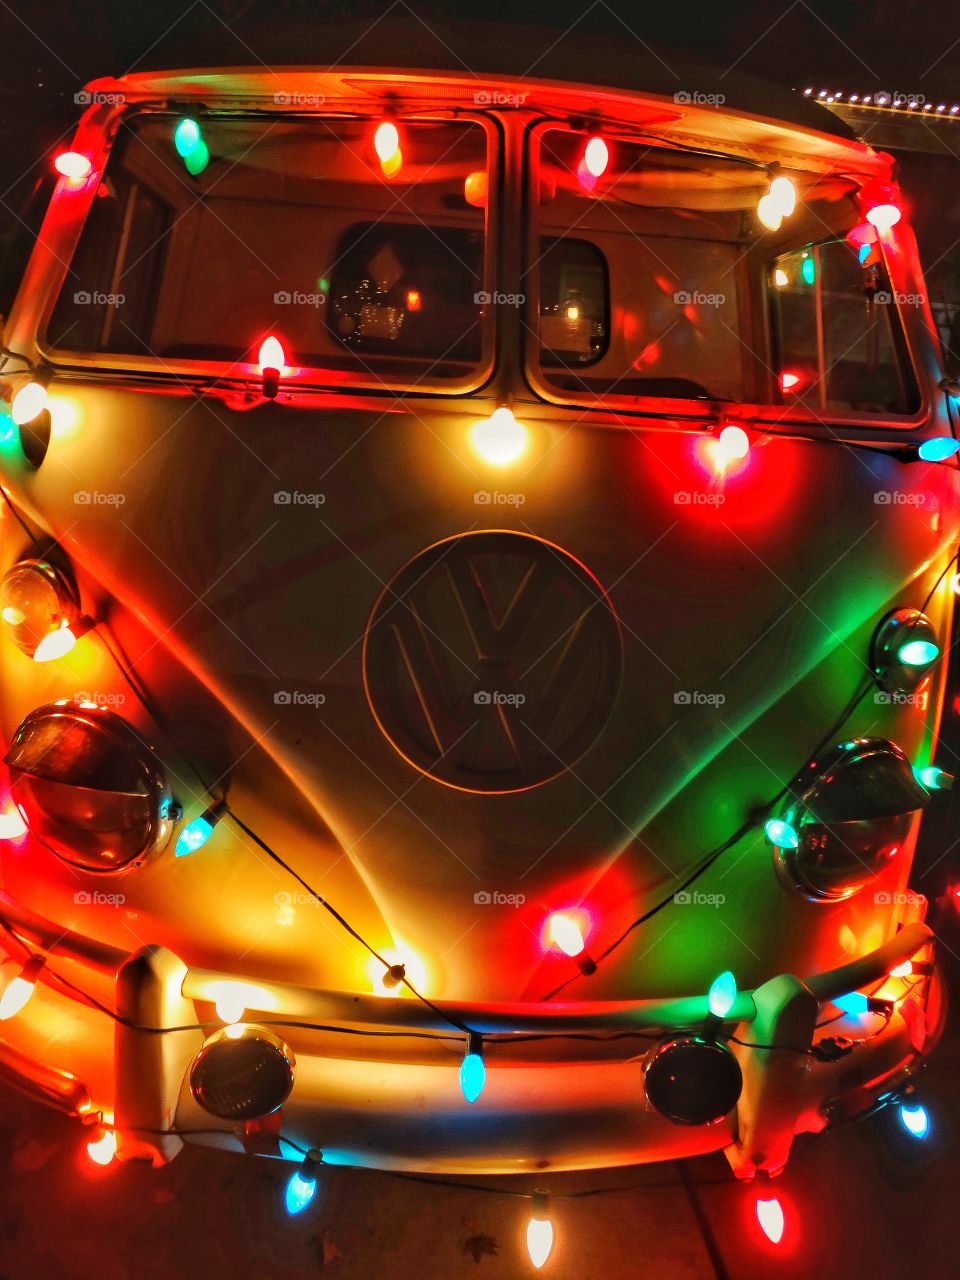 Old VW Van Decorated With Christmas Lights